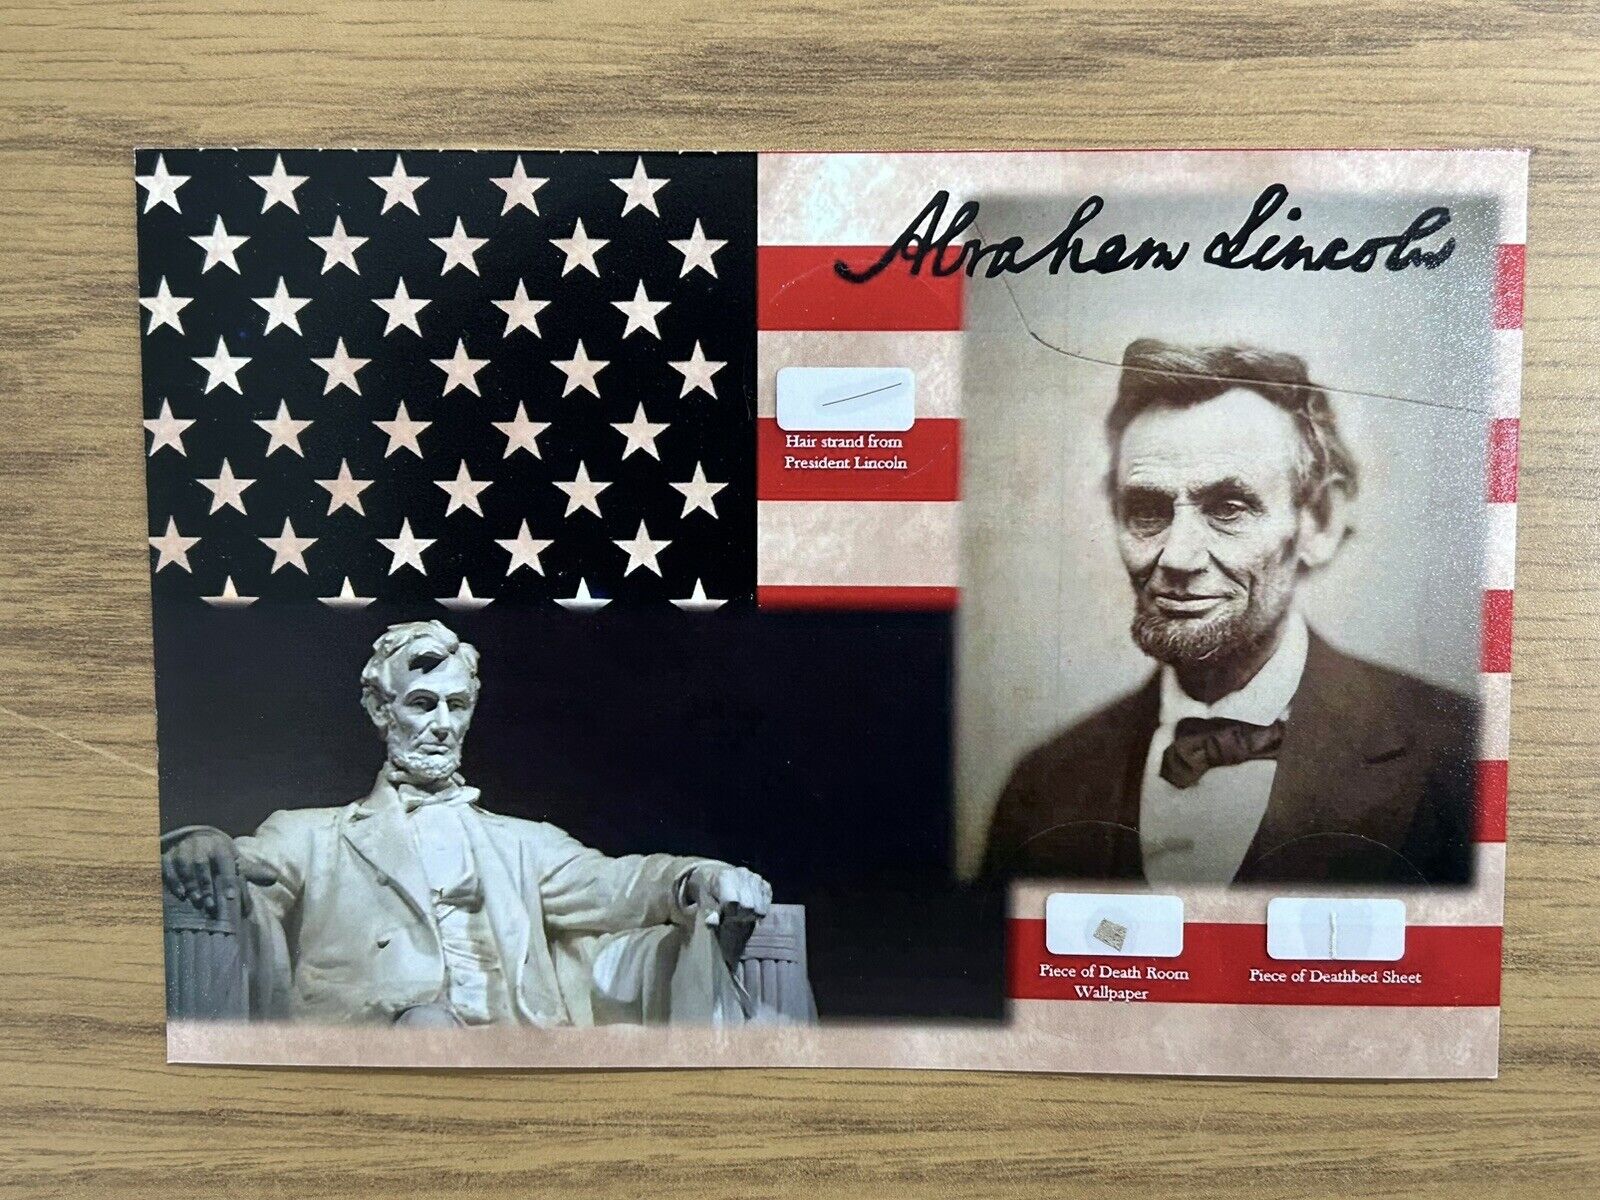 Abraham Lincoln Hair strand lock Blood Stained Deathbed Wallpaper Relics History